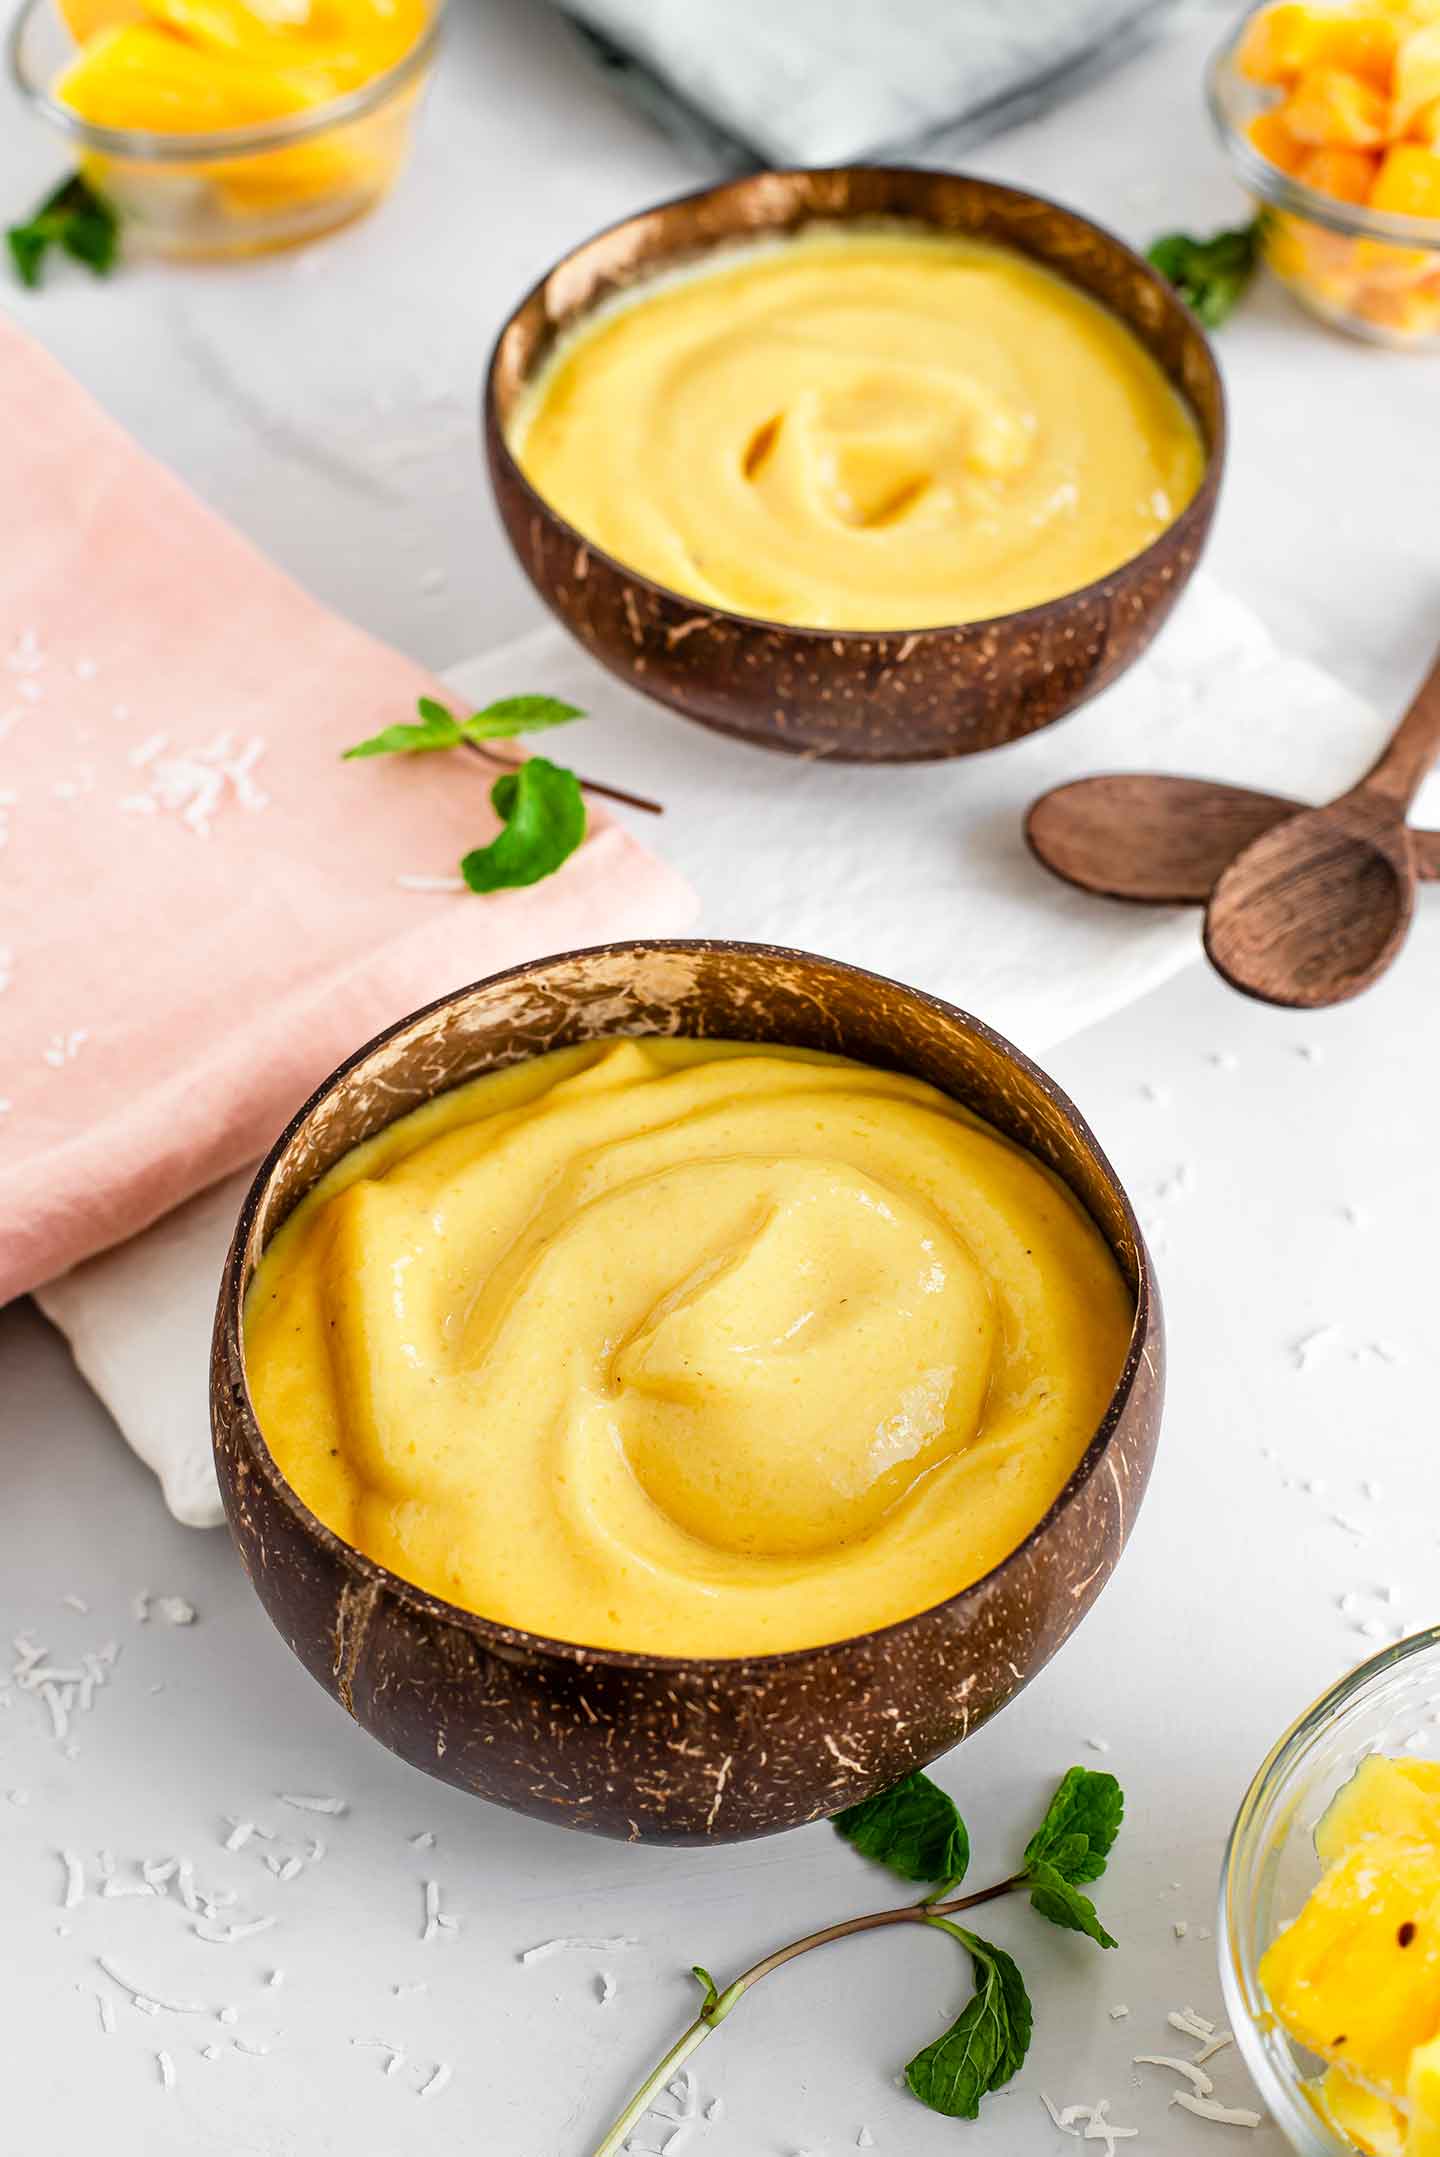 Top down view of two coconut bowls filled with bright yellow tropical jackfruit smoothies. Sprigs of mint, bamboo spoons and small bowls of mango, pineapple, and jackfruit surround the smoothies.